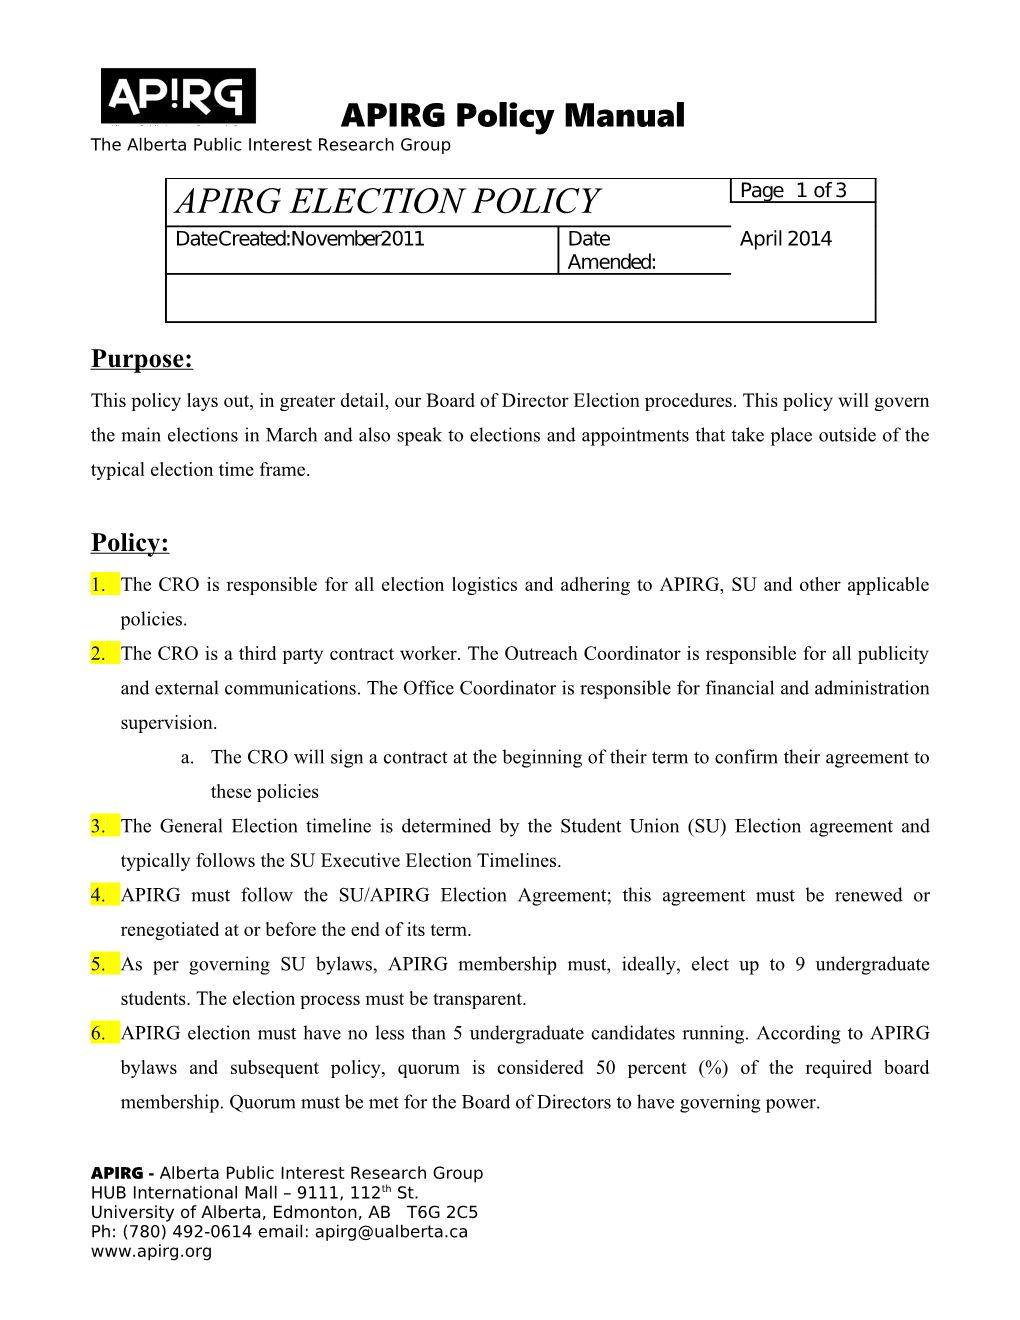 APIRG Policy Manual the Alberta Public Interest Research Group